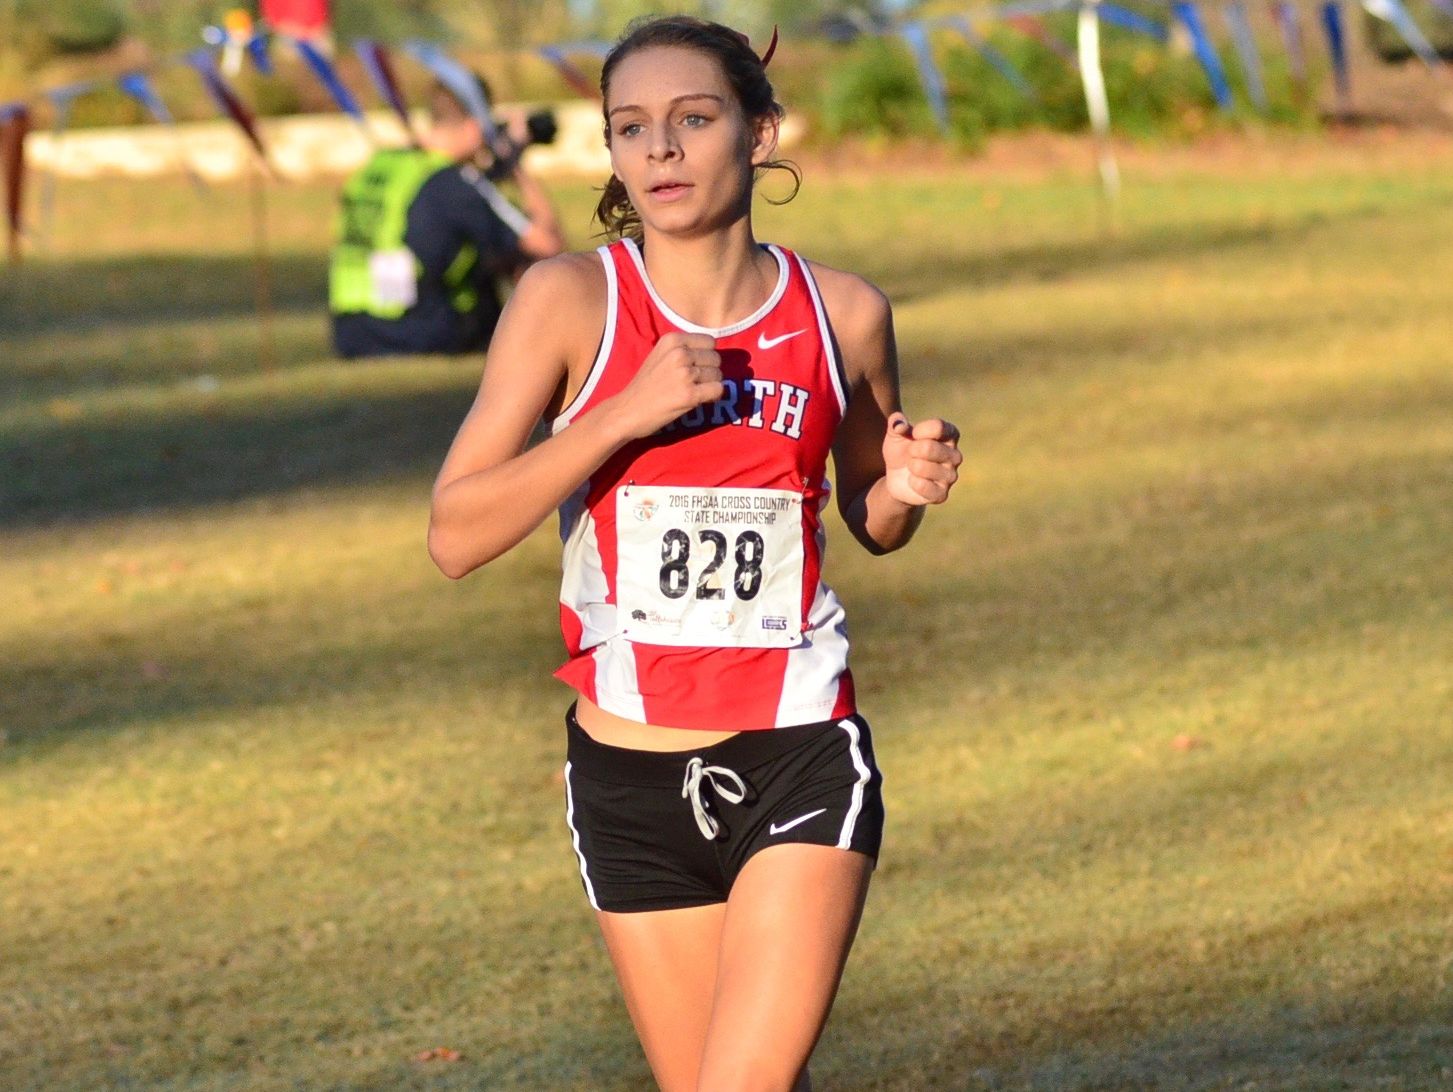 North Fort Myers' Kayla Easterly runs the course Saturday at the Class 3A state cross country meet in Tallahassee. Easterly finished third.